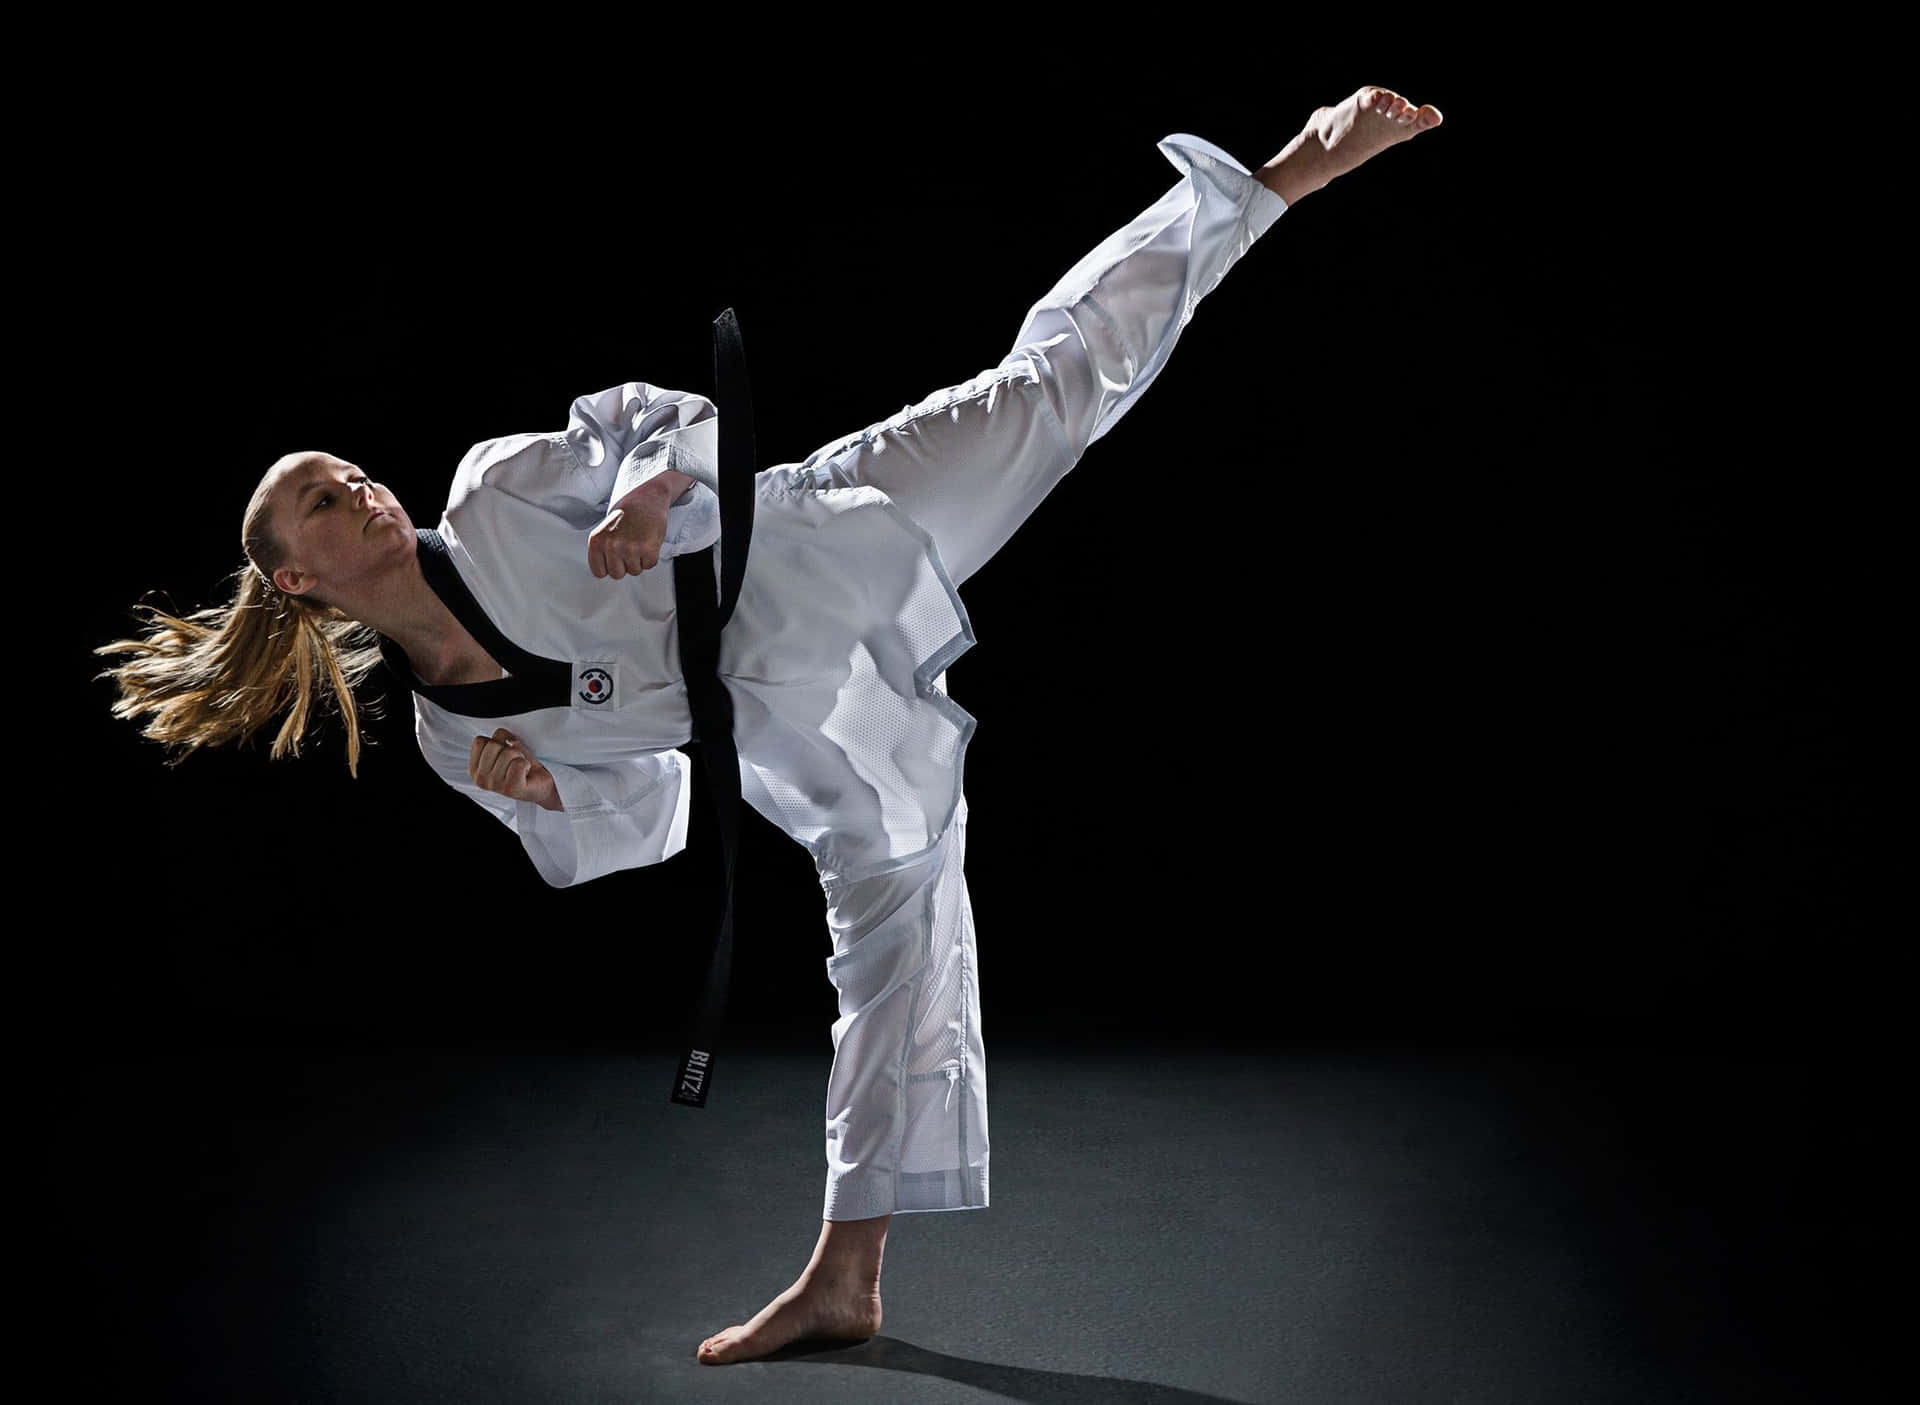 A Woman In A White Karate Outfit Doing A Kick